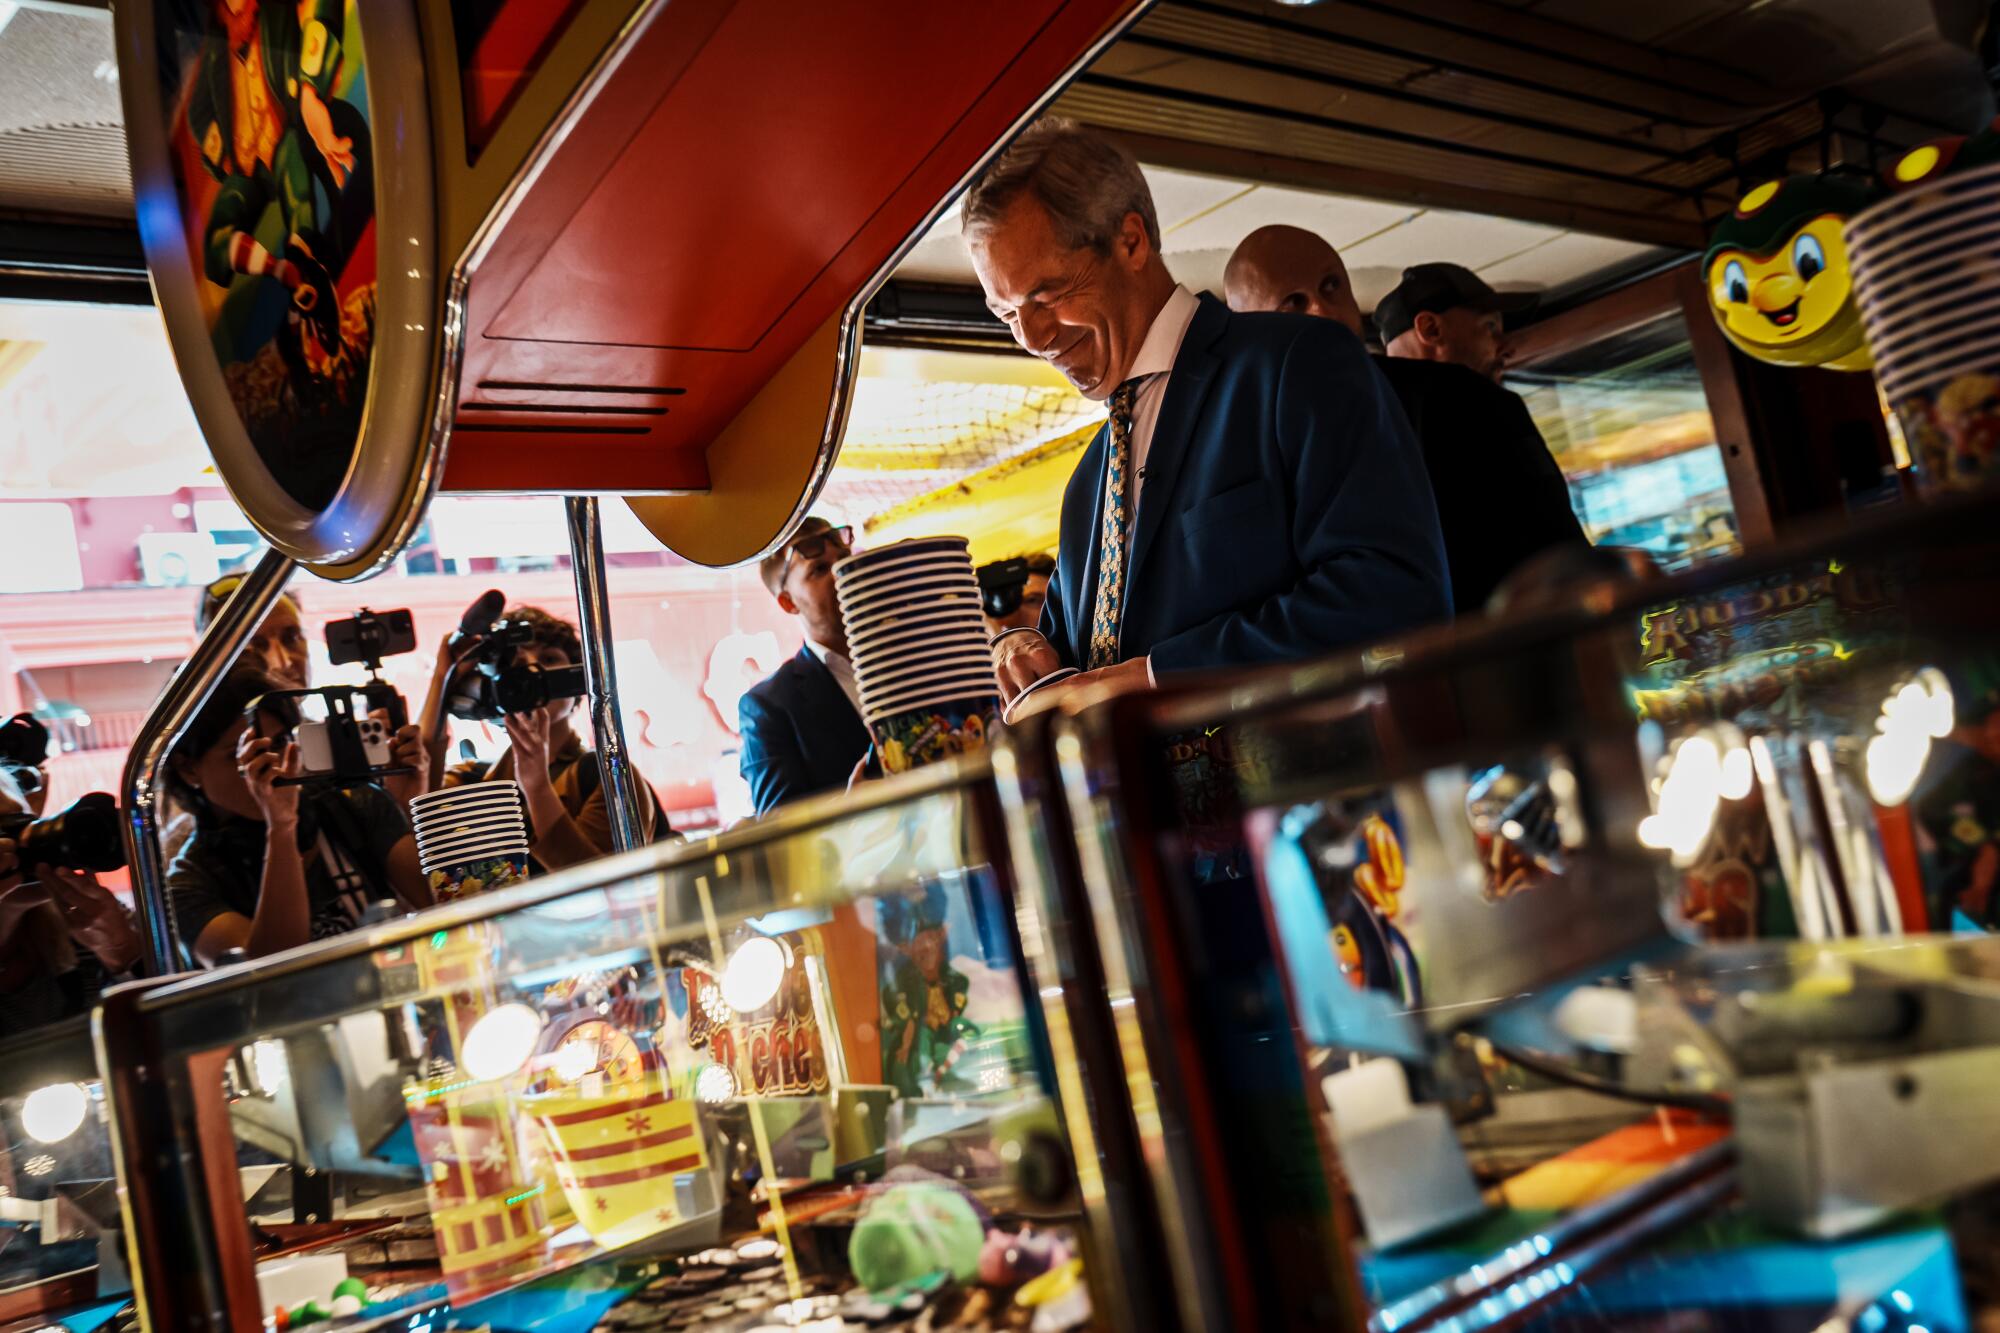 Nigel Farage reacts to playing a game at an amusement arcade.